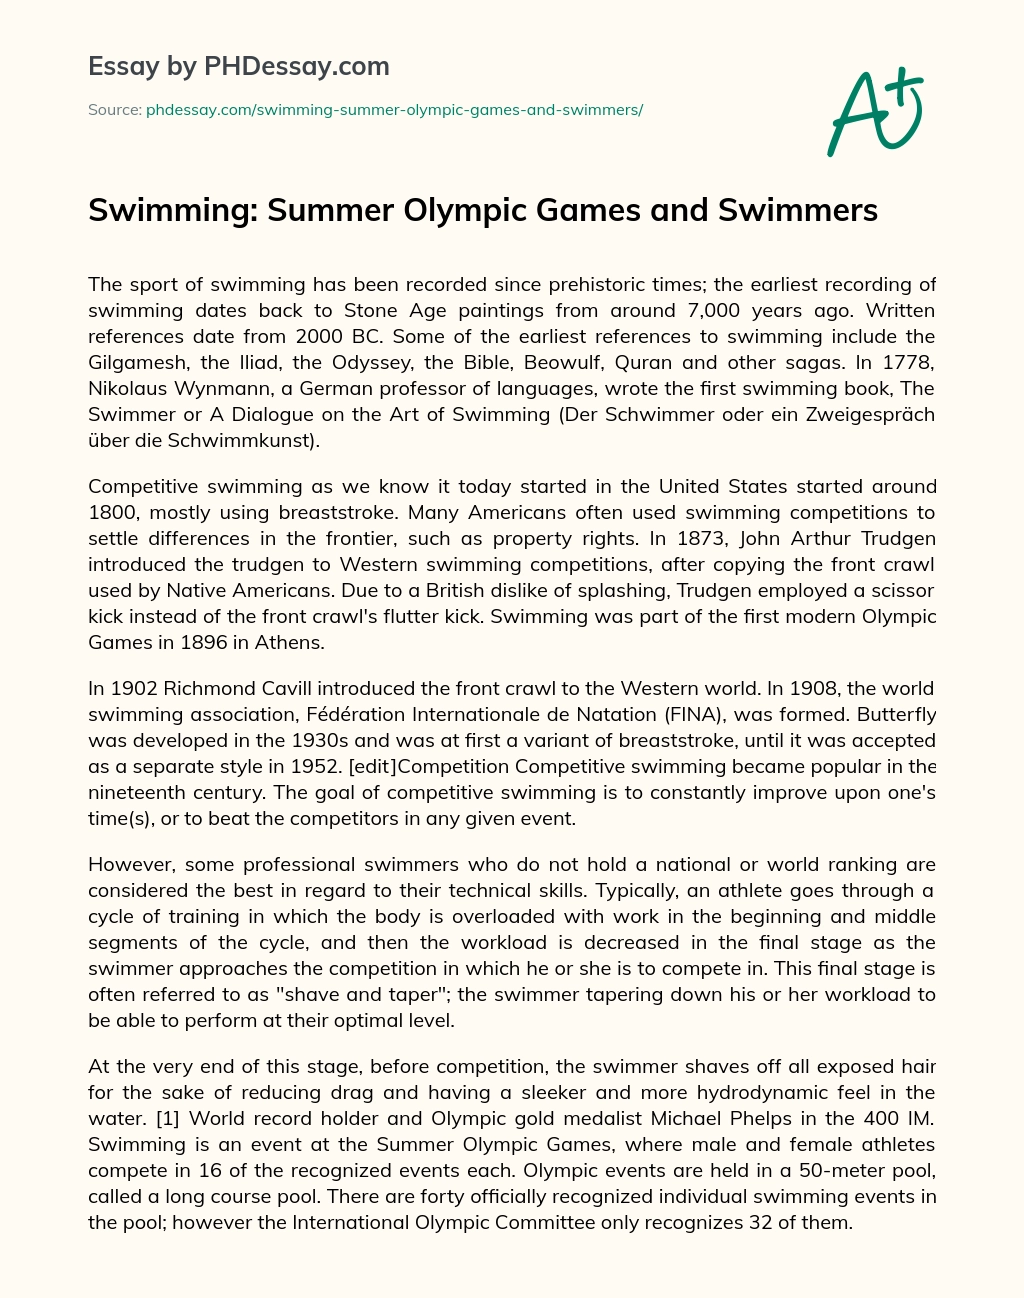 Swimming: Summer Olympic Games and Swimmers essay